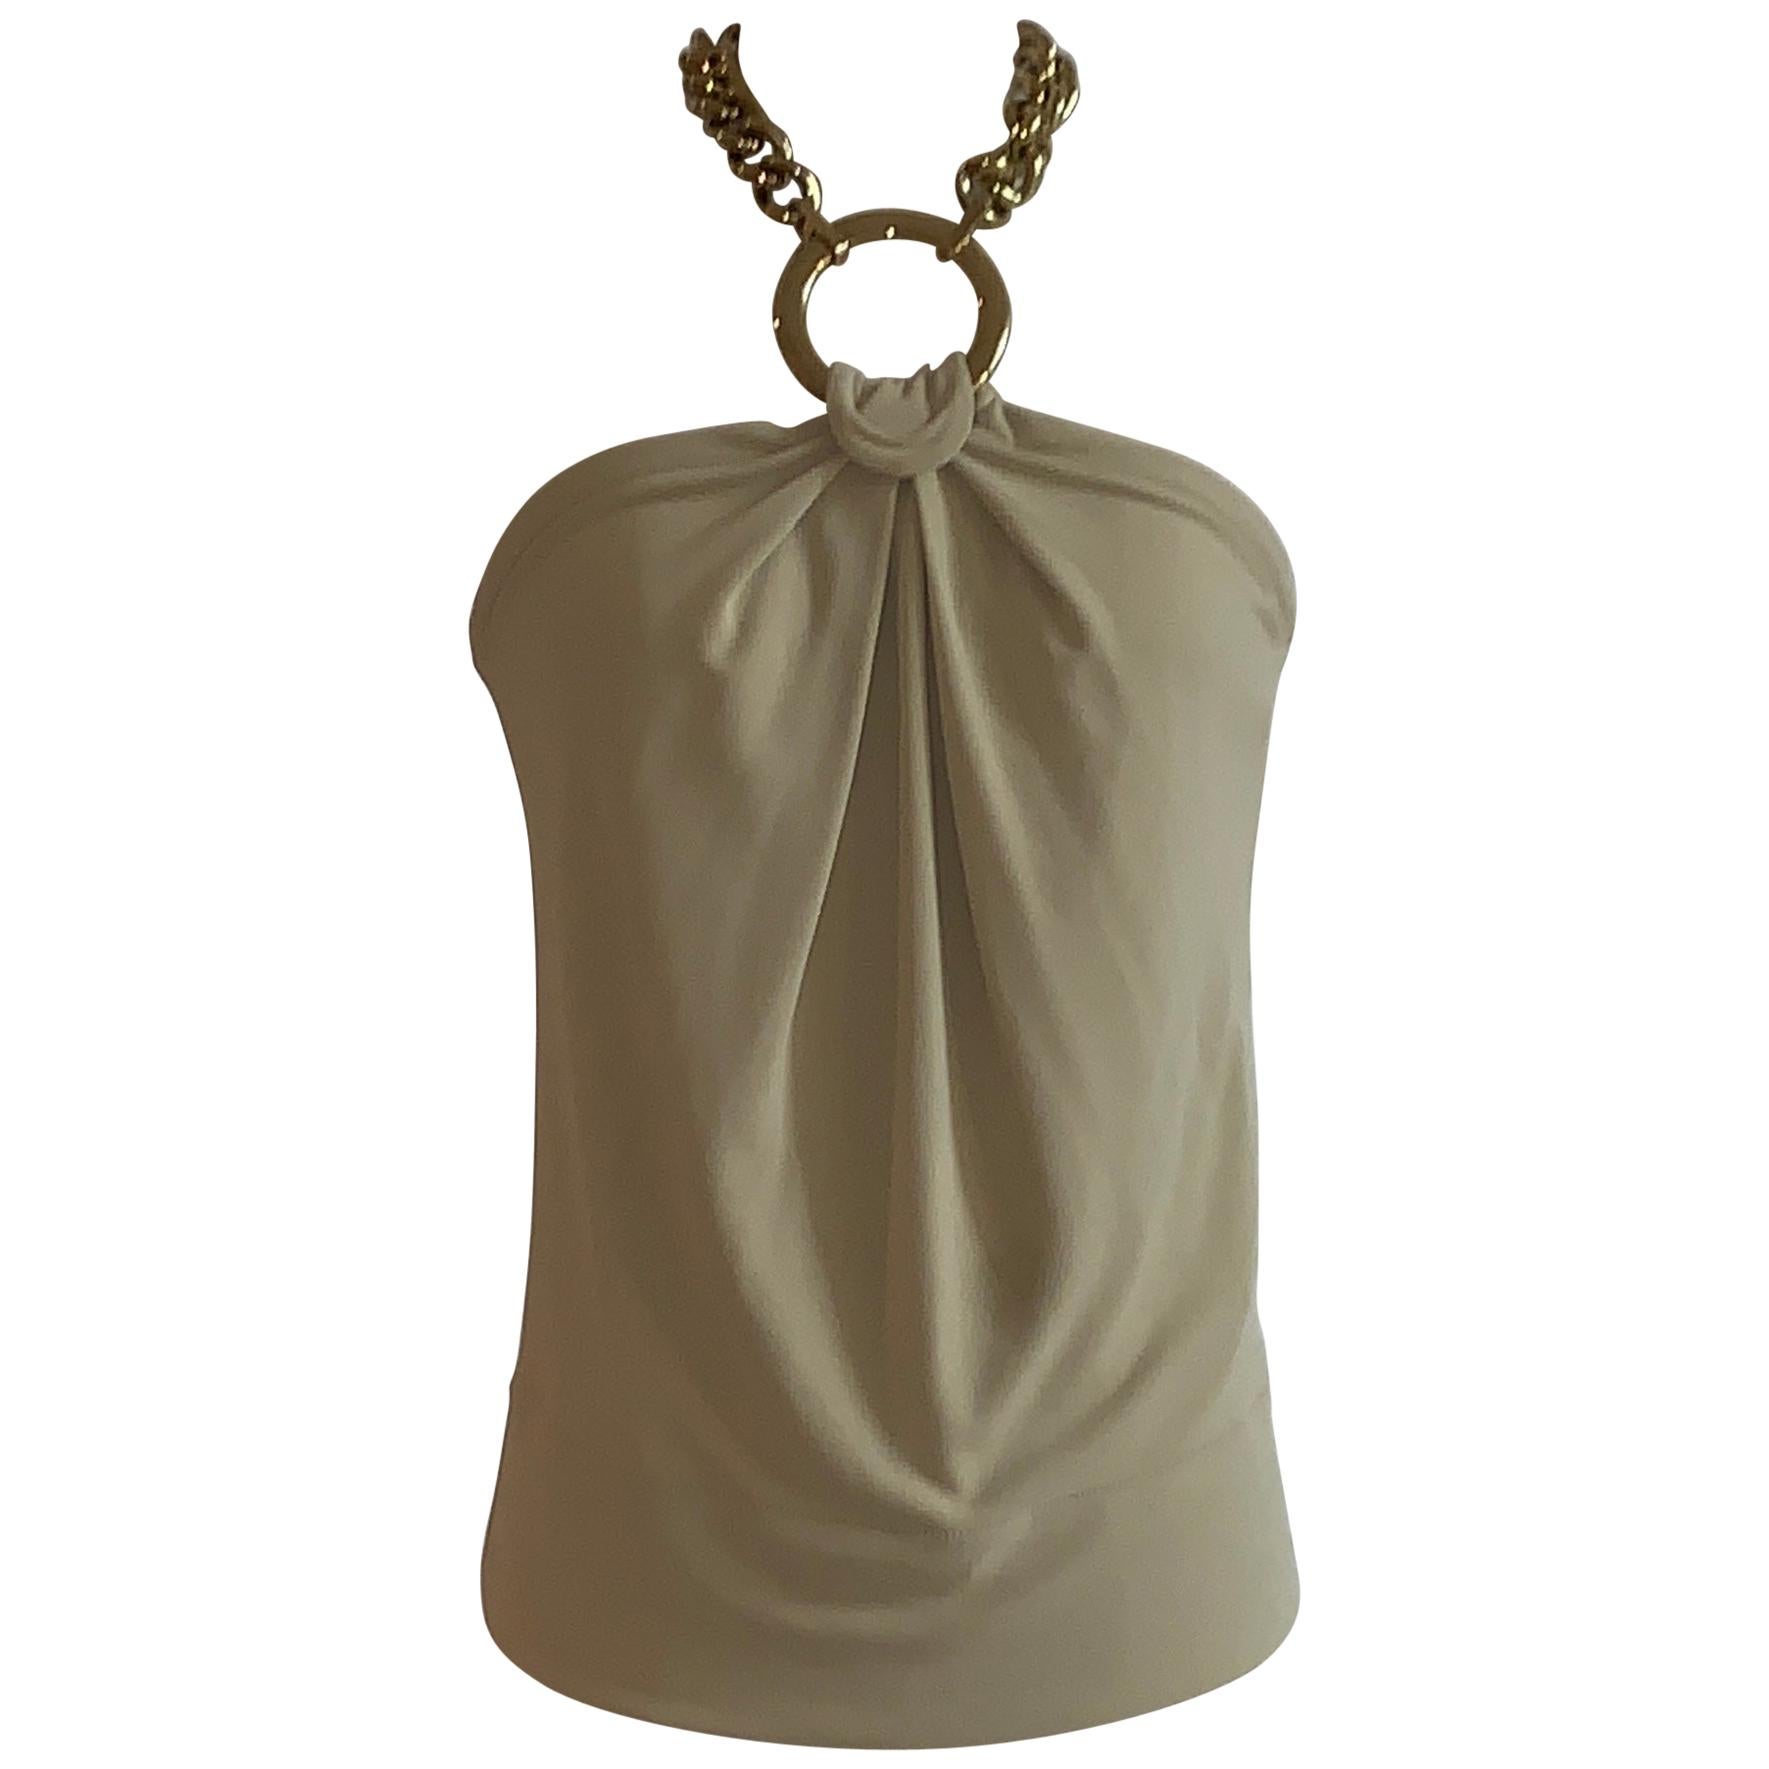 Dolce & Gabbana Tan Halter Top with Chunky Gold Chain Detail For Sale